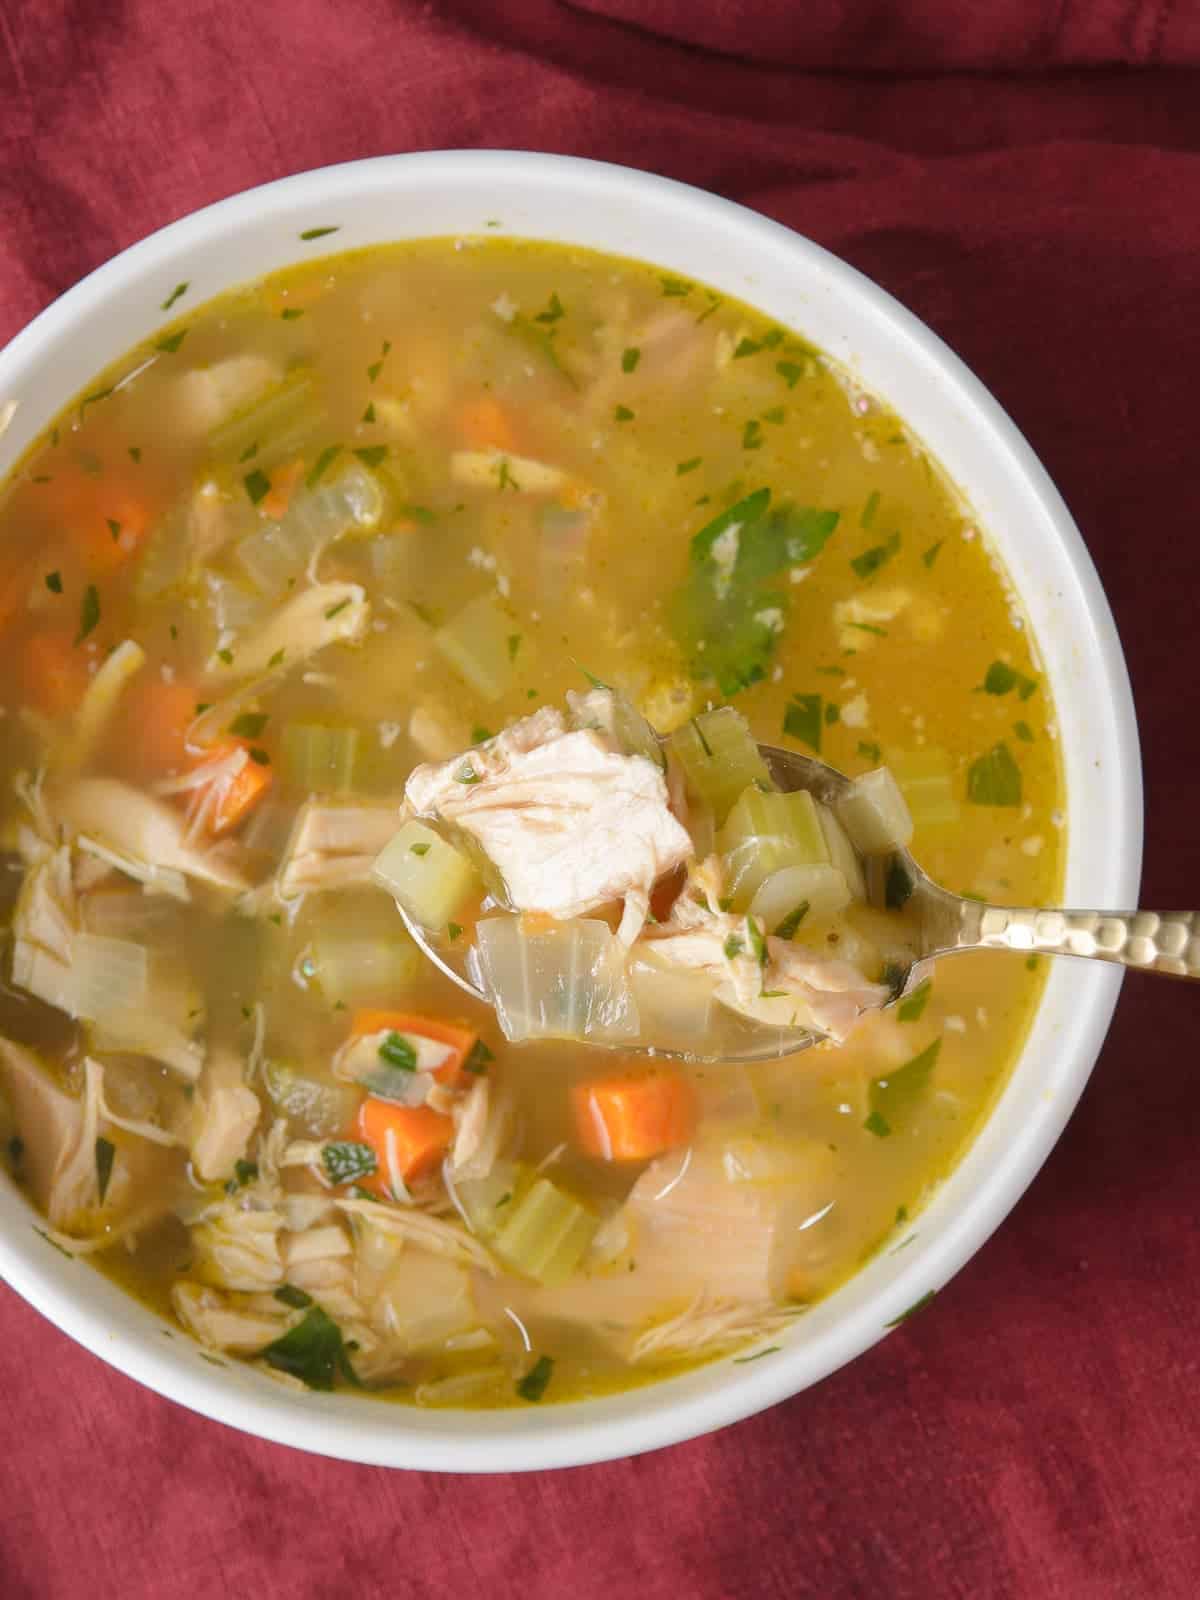 turkey soup in a bowl with a spoon lifting out a bite showing the tender turkey meat and rich broth
